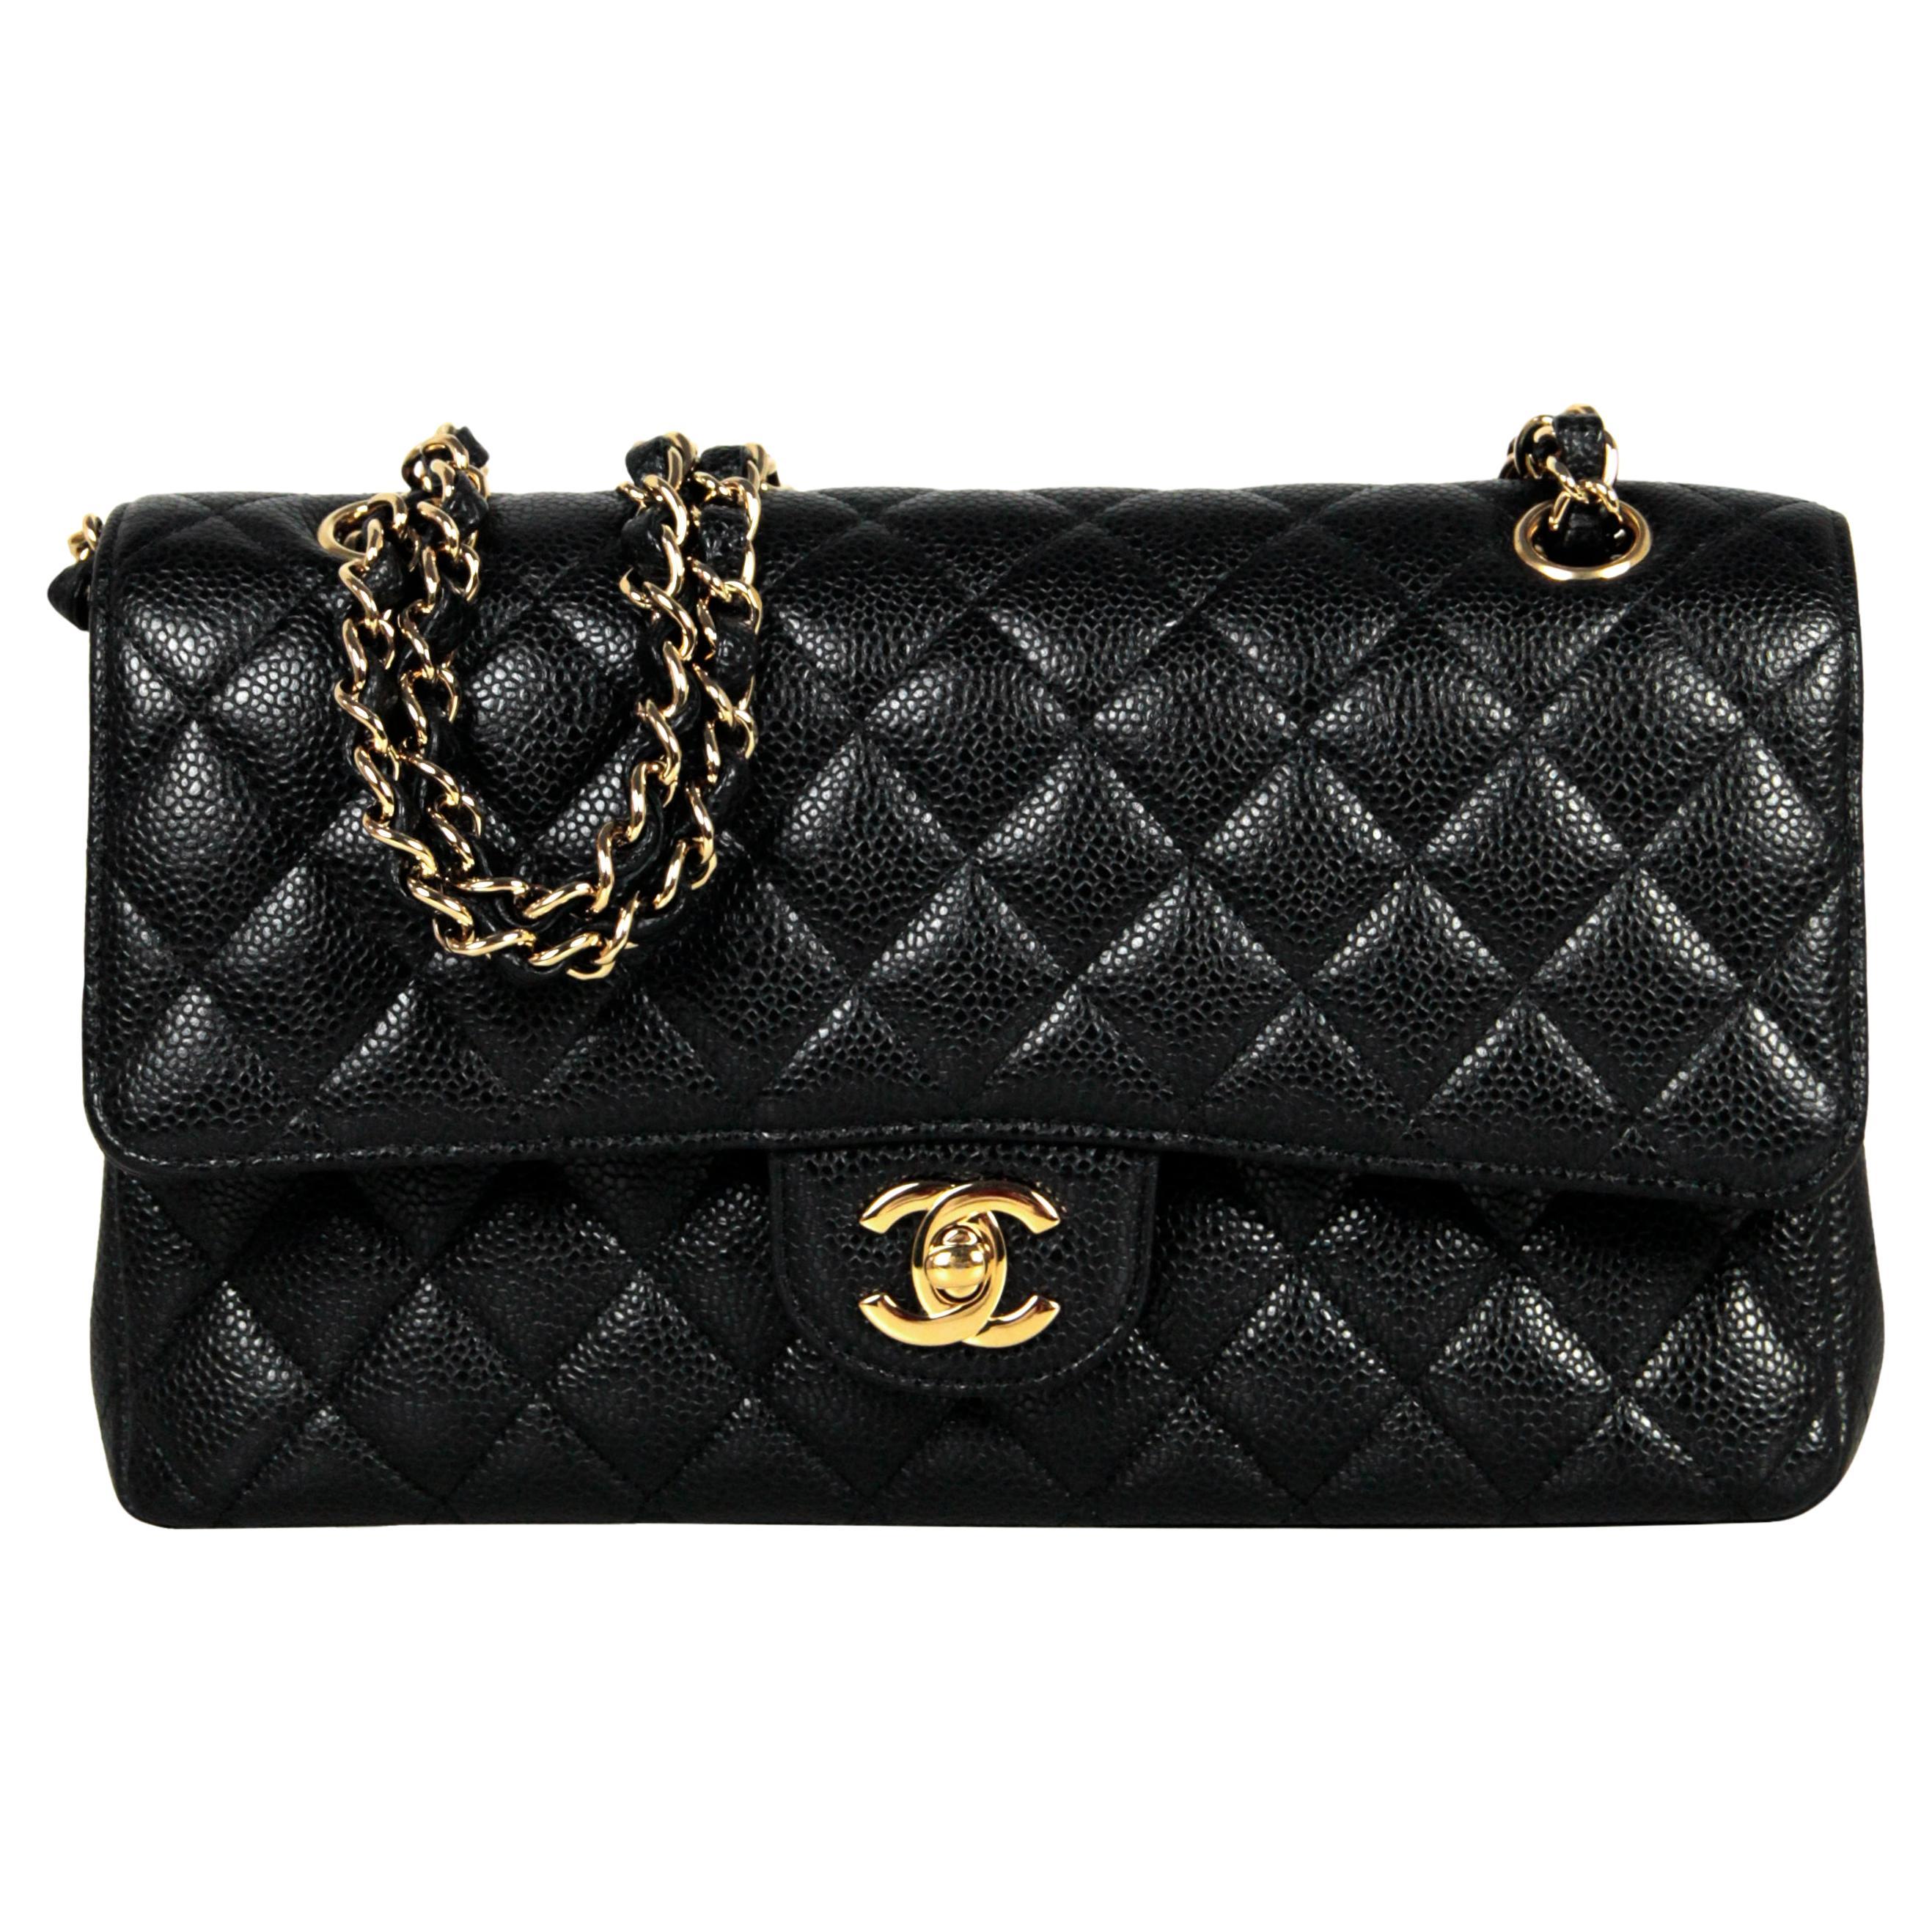 Chanel Black Lambskin Leather Quilted Classic Double Flap SM Bag w/ Rose Gold HW